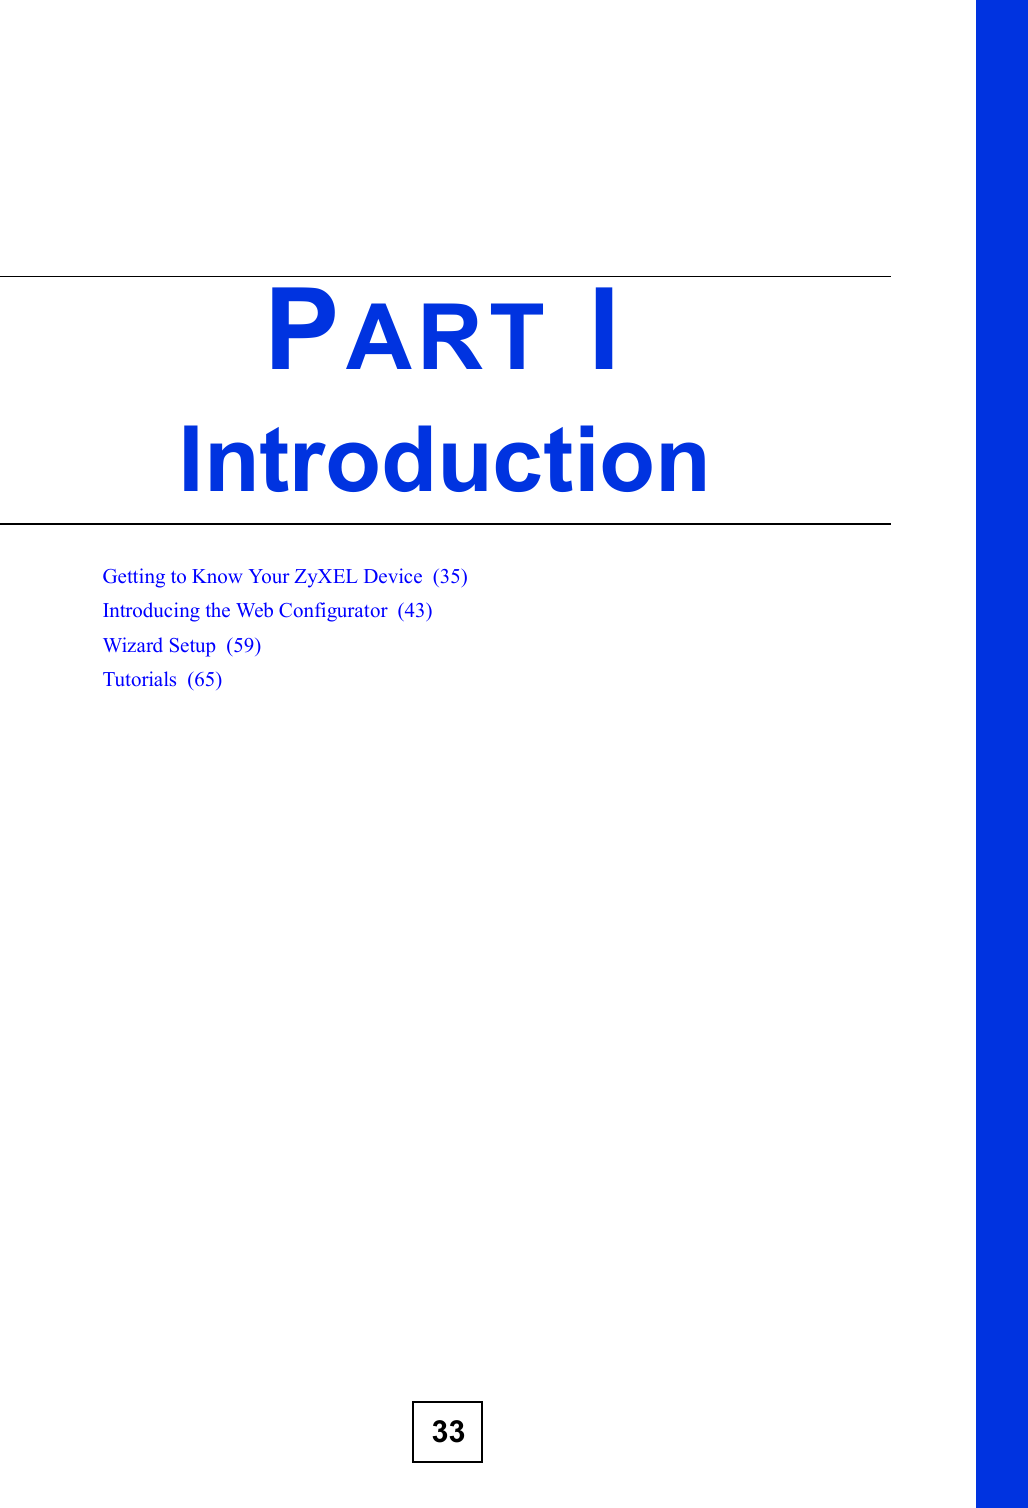 33PART IIntroductionGetting to Know Your ZyXEL Device  (35)Introducing the Web Configurator  (43)Wizard Setup  (59)Tutorials  (65)